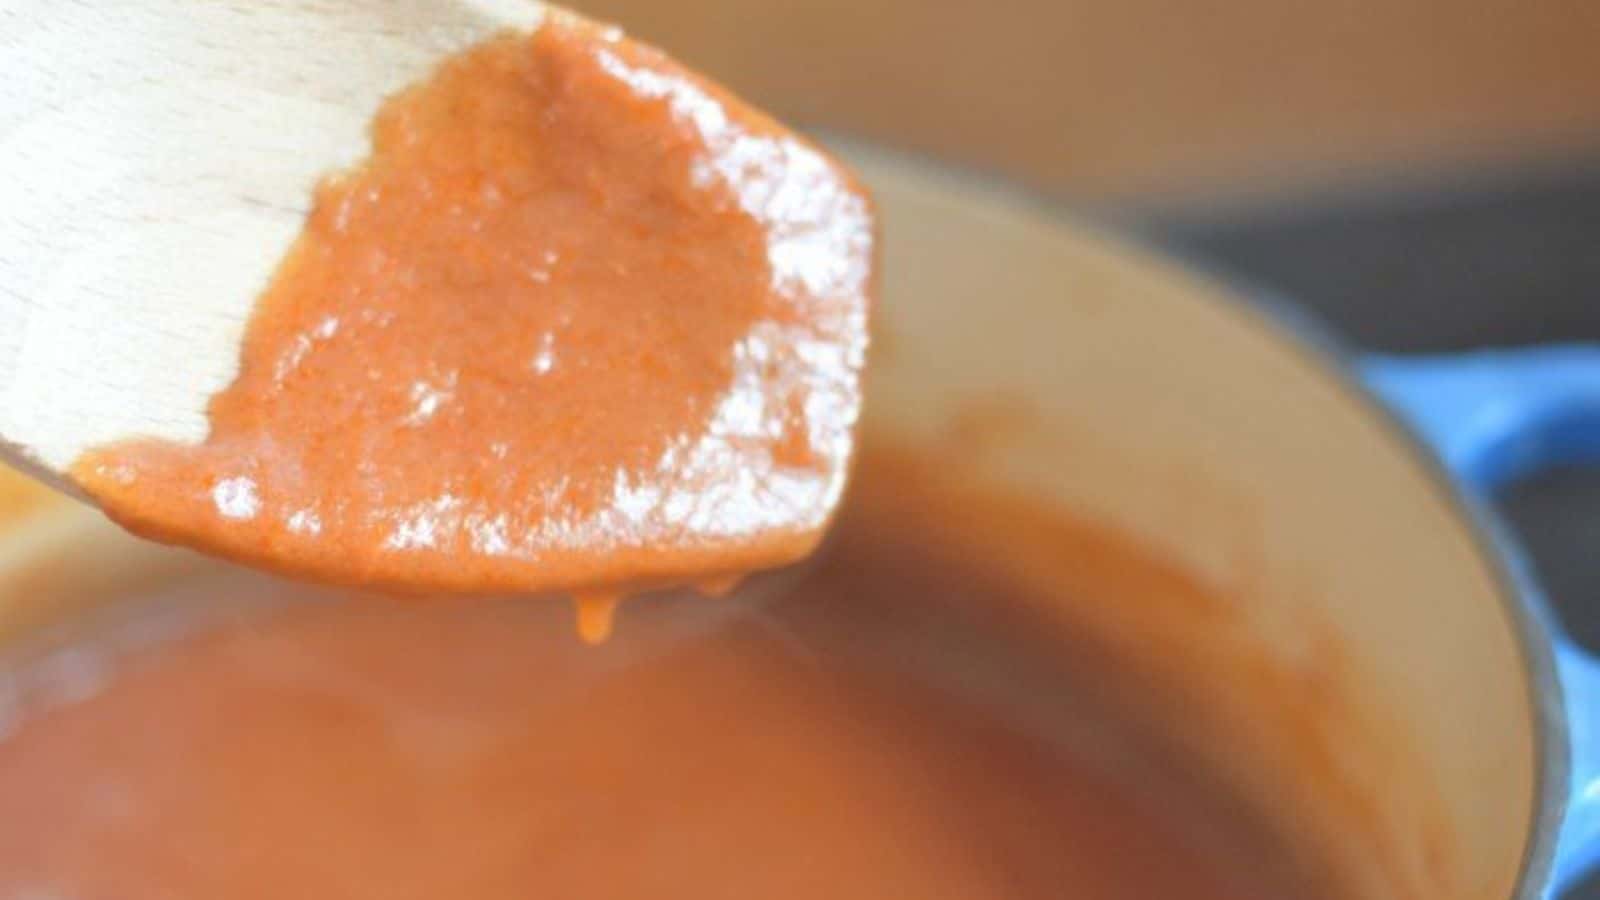 Image shows A wooden spoon is dripping red enchilada sauce into the pot containing the rest.